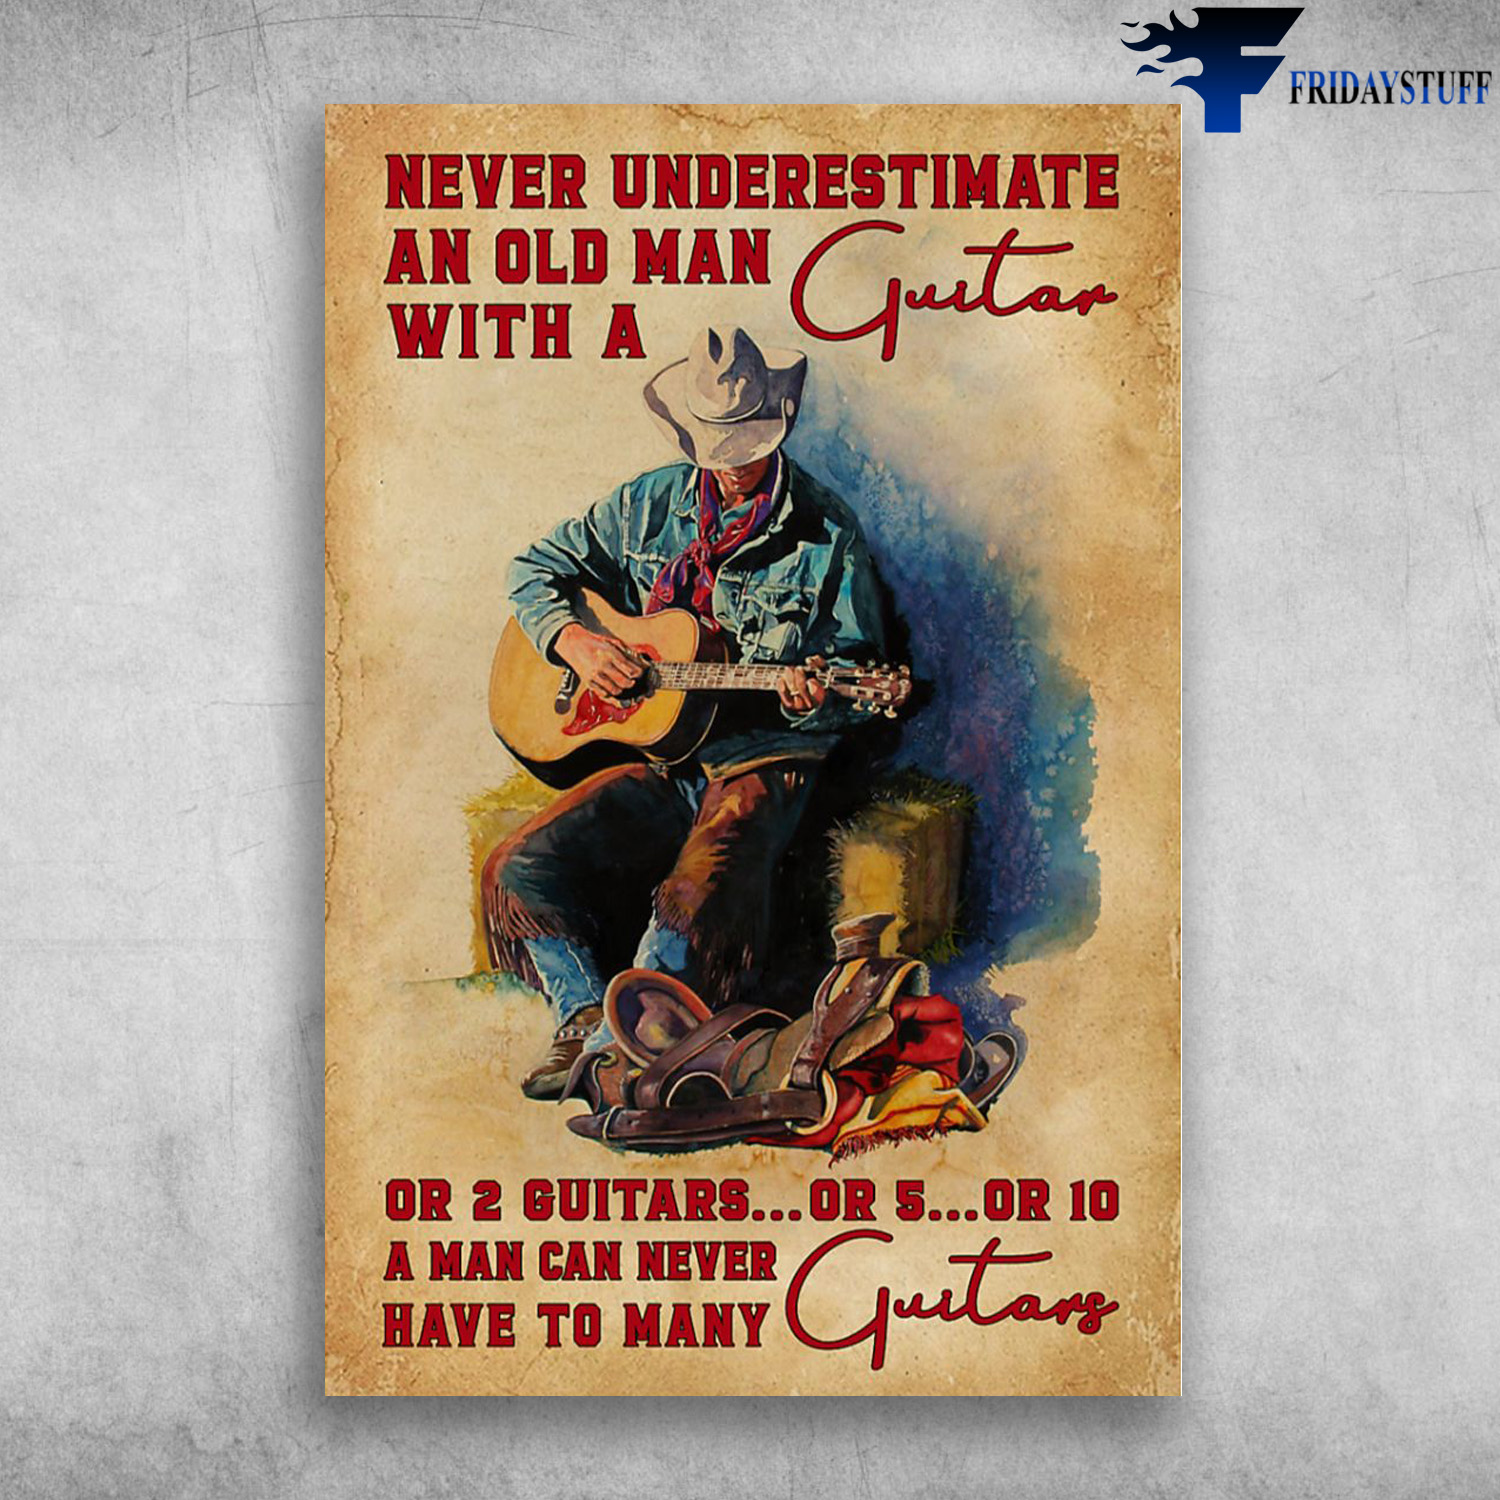 The Cowboy Playing Guitar - Never Underestimate An Old Man With A Guitar